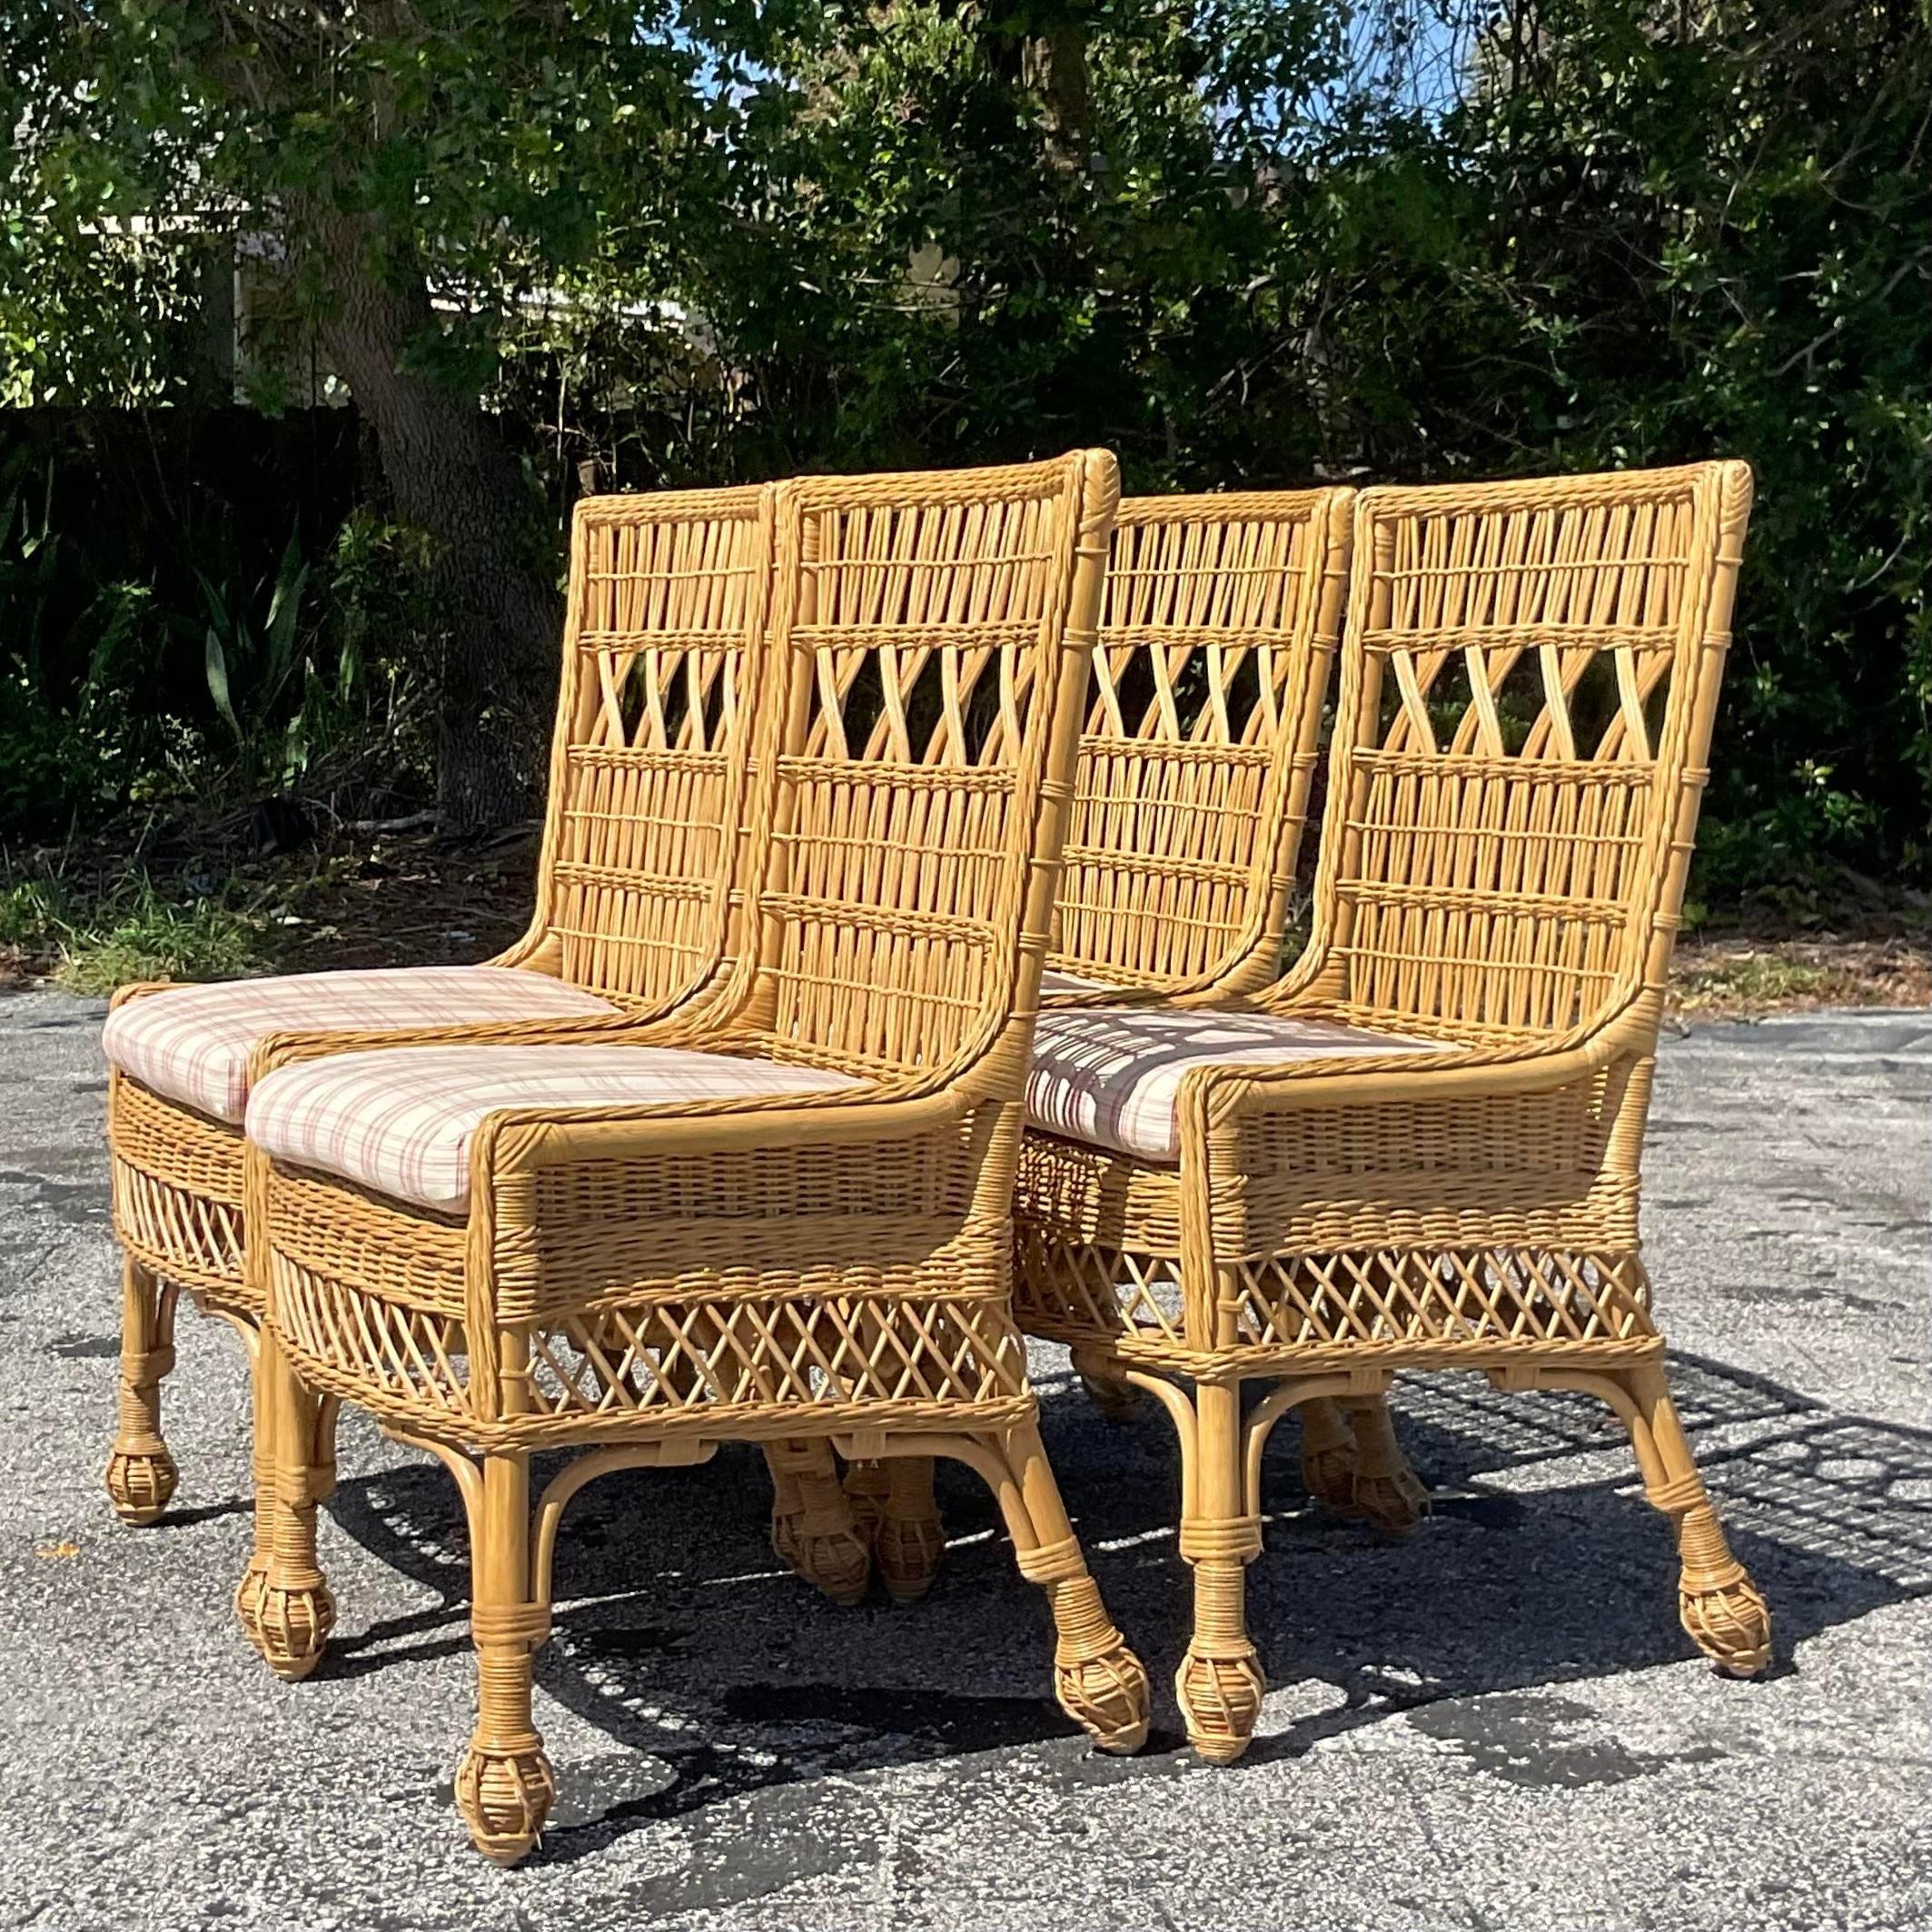 20th Century Vintage Coastal Woven Rattan Dining Chairs - Set of 4 For Sale